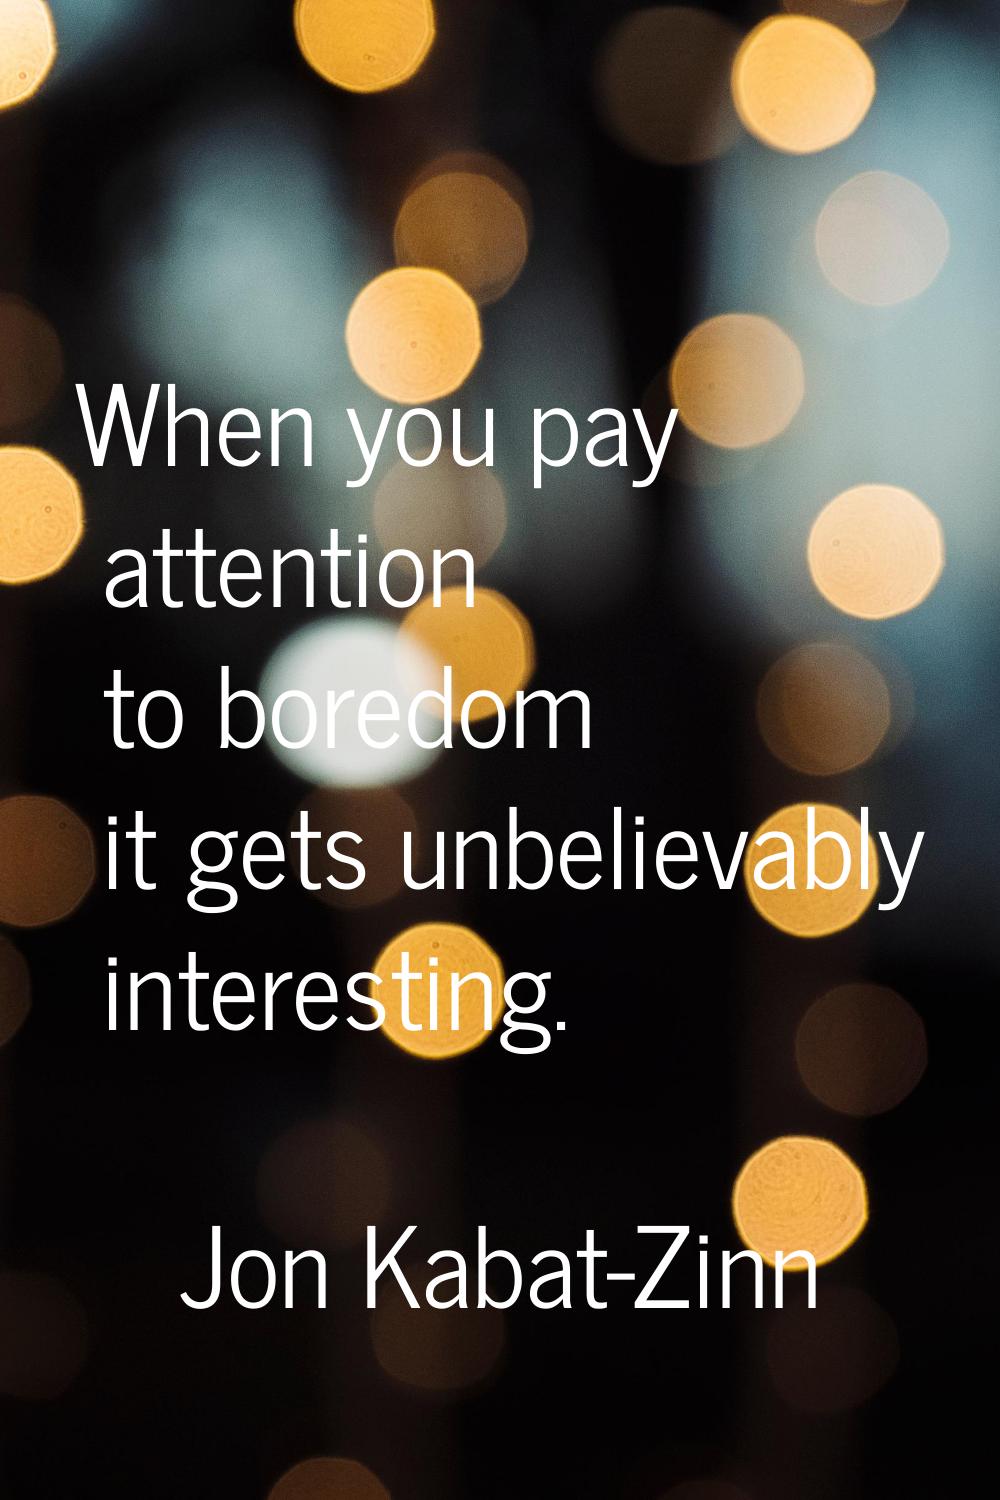 When you pay attention to boredom it gets unbelievably interesting.